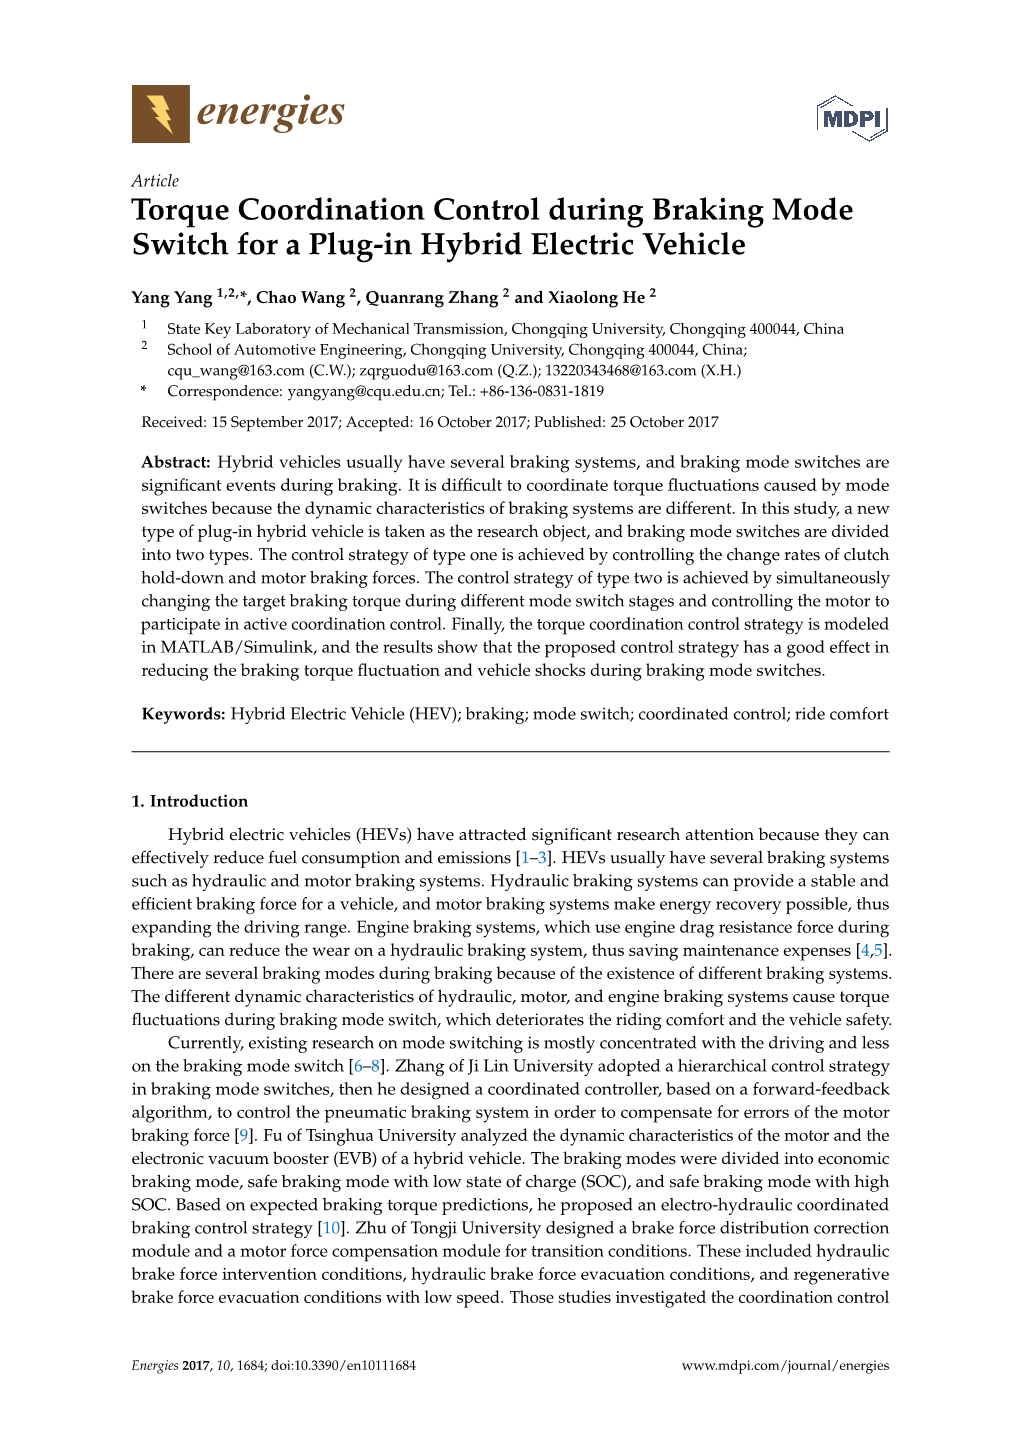 Torque Coordination Control During Braking Mode Switch for a Plug-In Hybrid Electric Vehicle